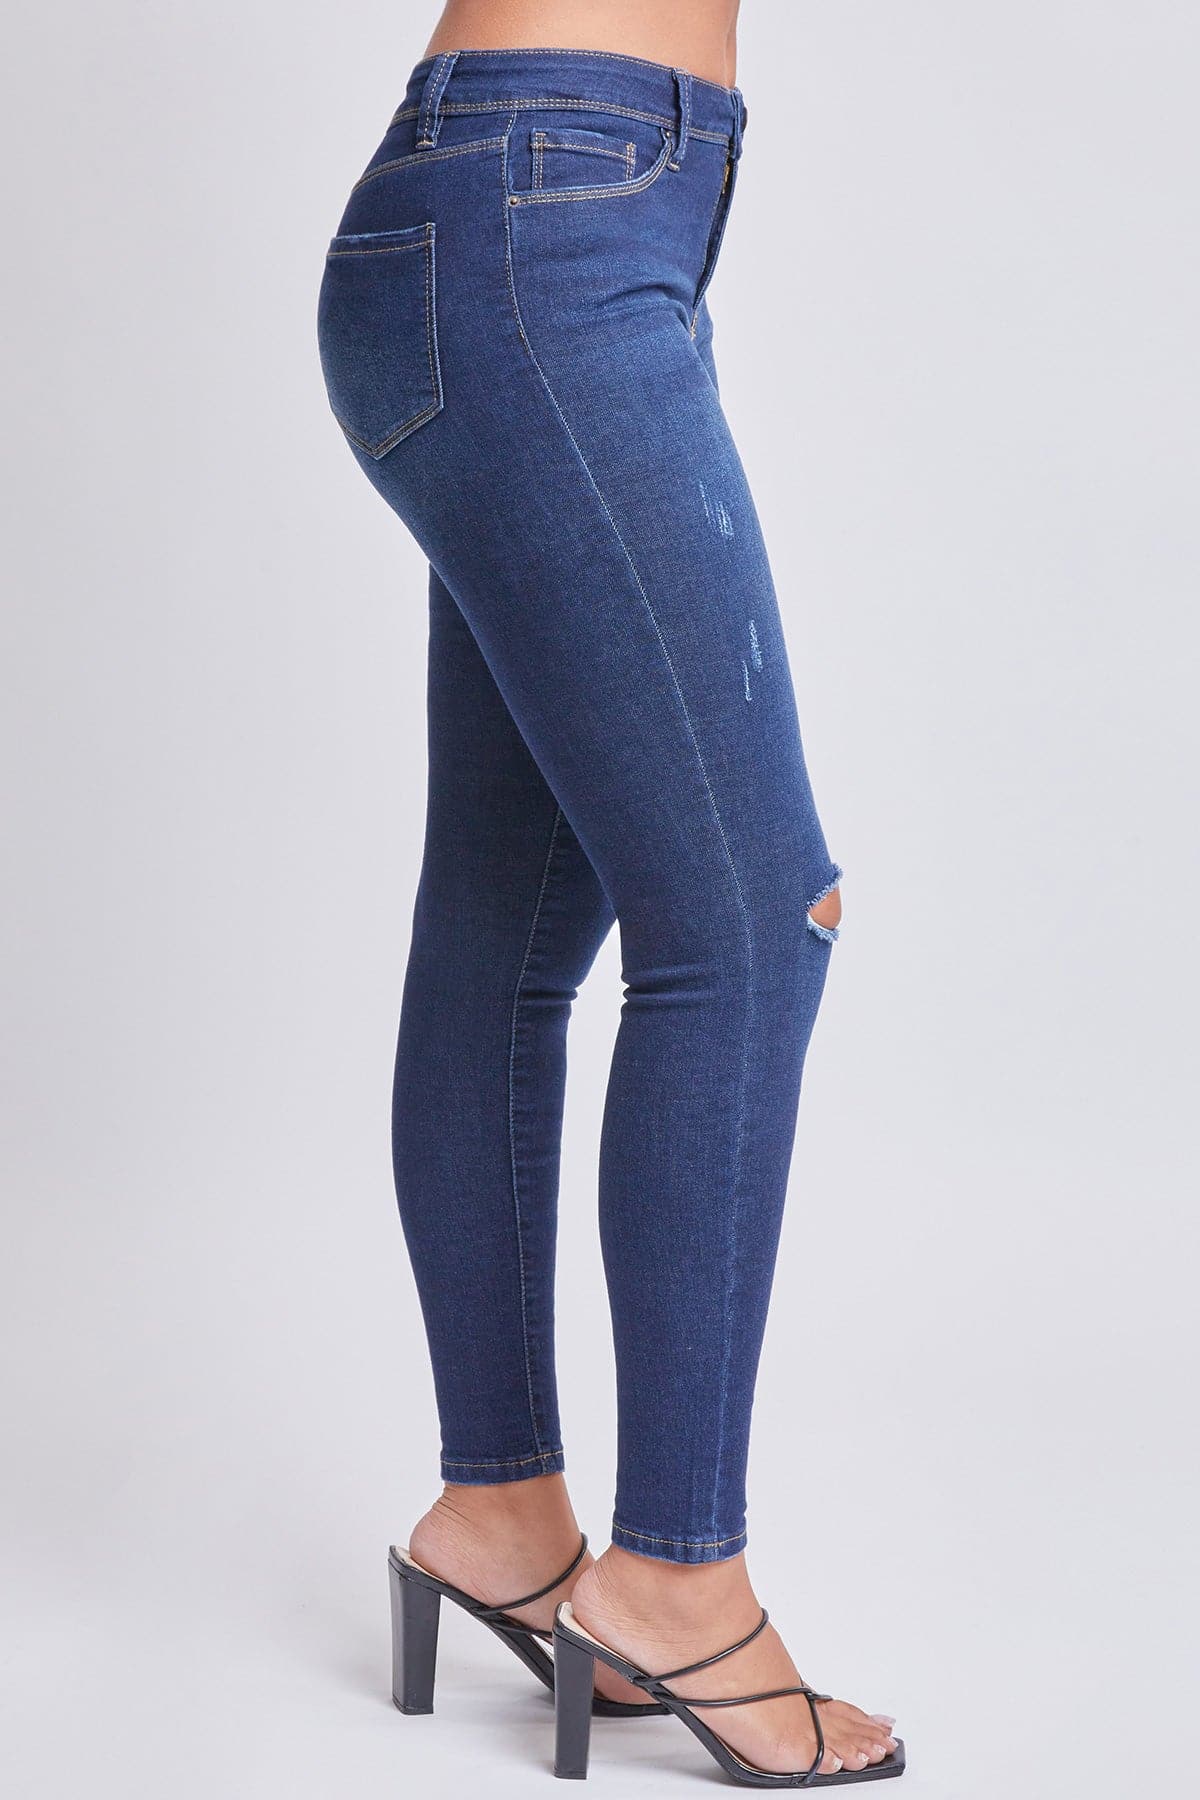 Women's Essential Sustainable Distressed Skinny Jeans